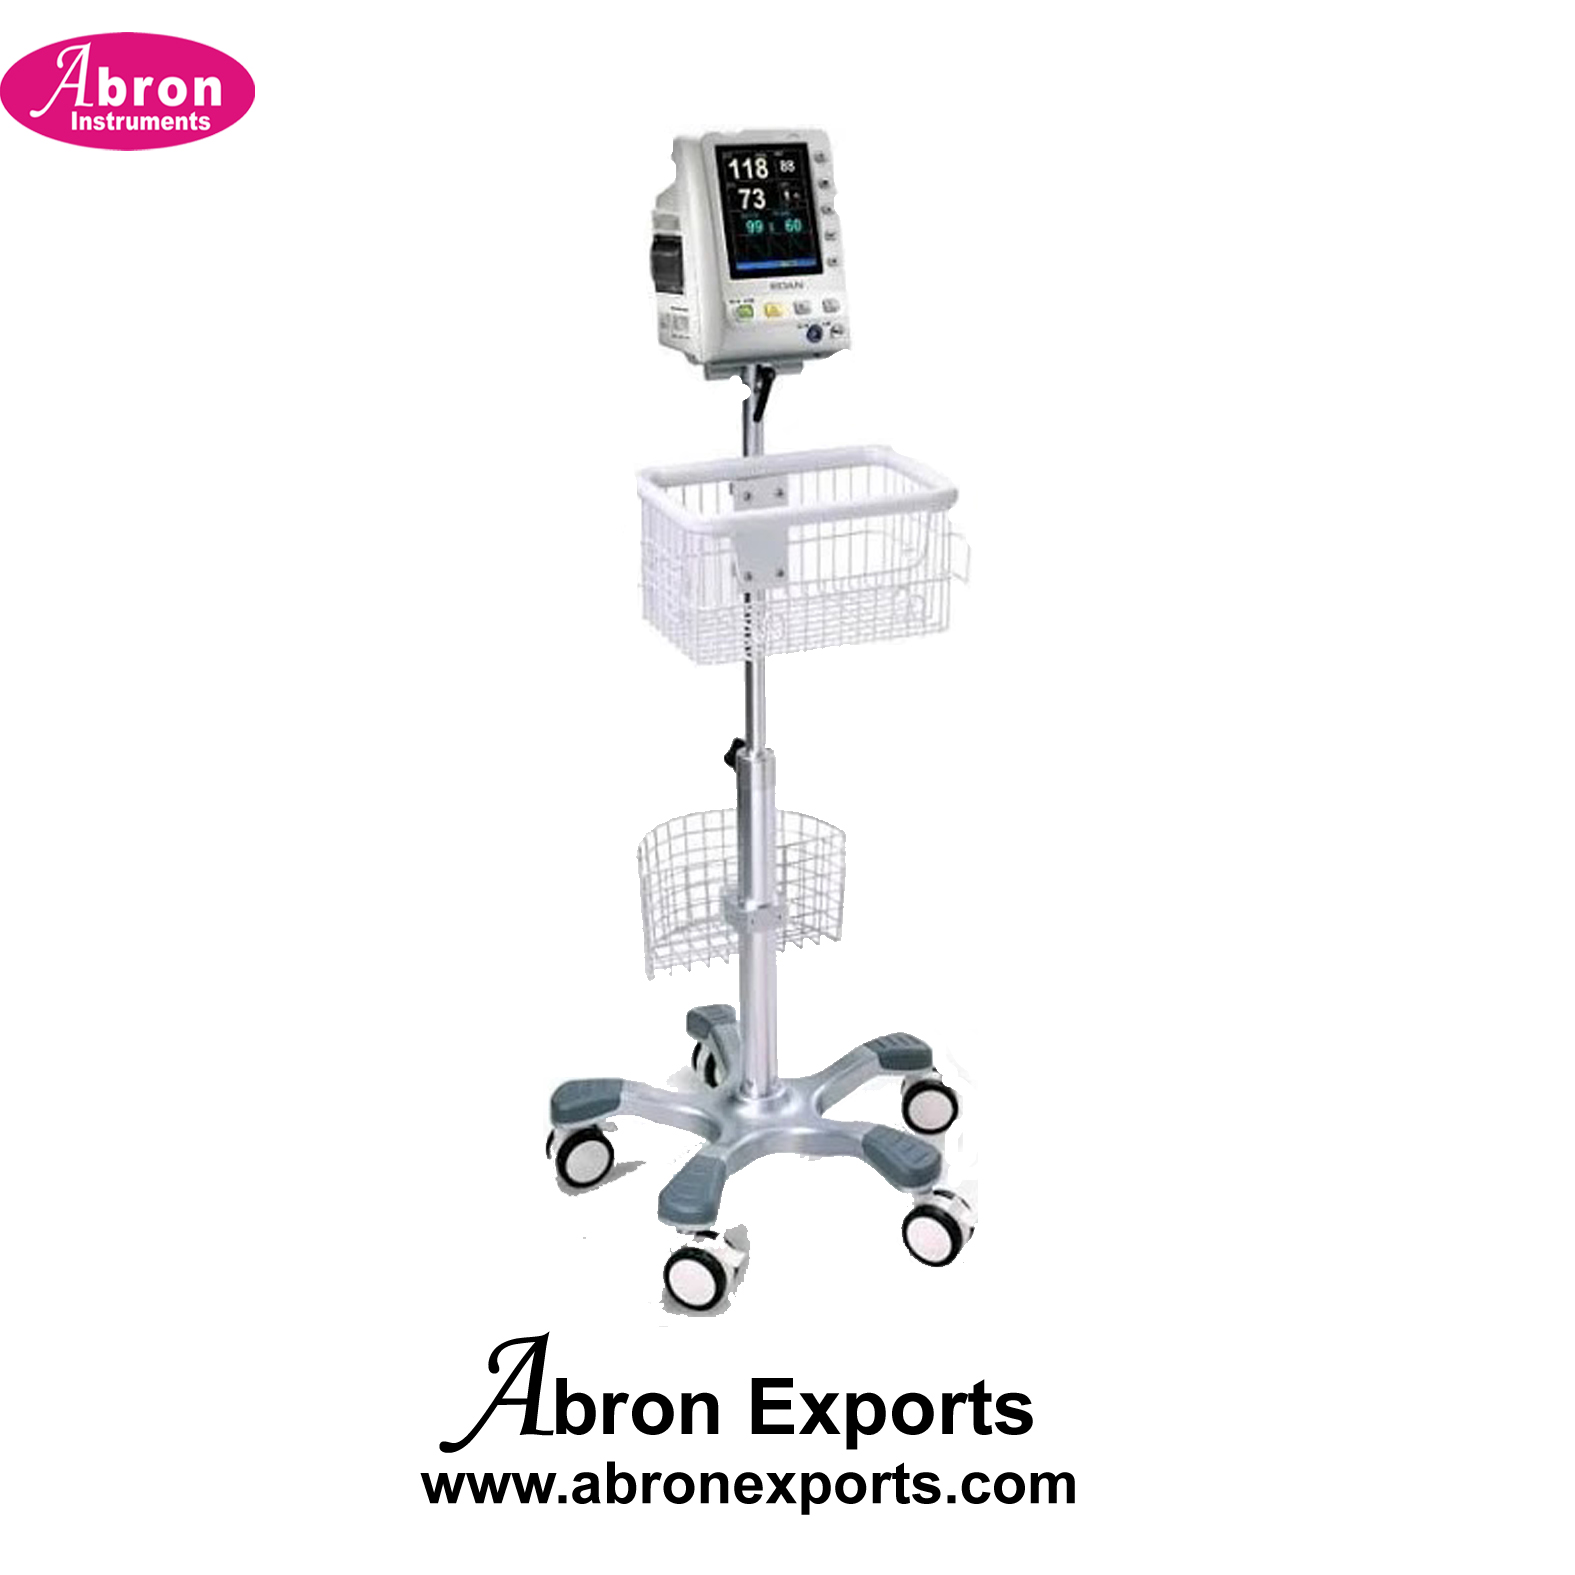 Patient Monitor roll up Stand with basket wheels Hospital Nursing Home Abron ABM-2552STT 